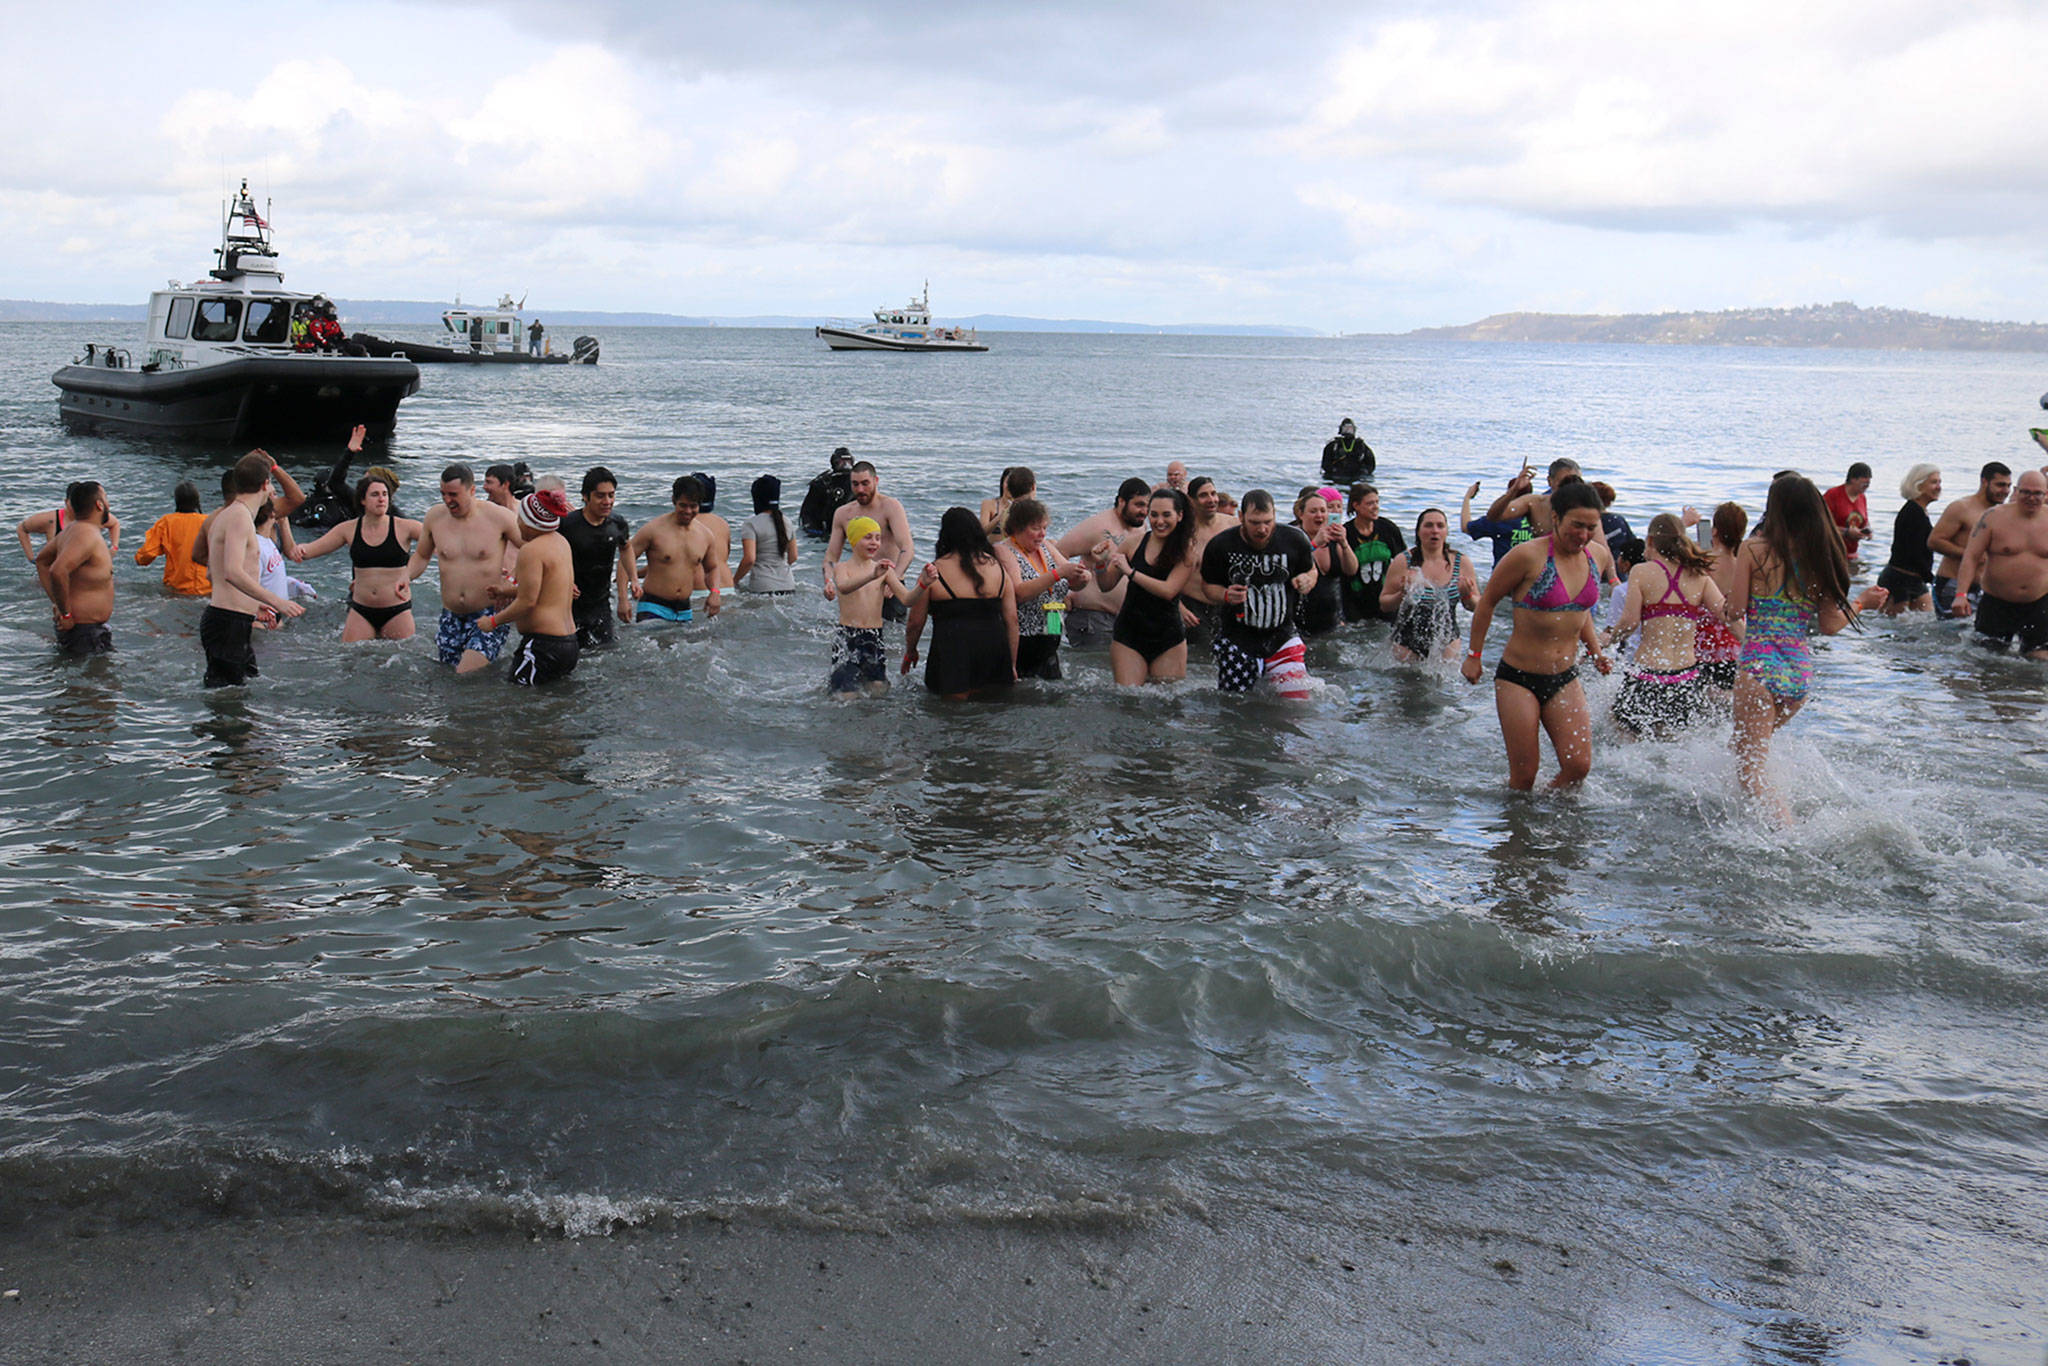 The polar plunge at Alki Beach fell short of breaking the world record of 1,799 people, set in 2015 in Poland. Katie Metzger/staff photo